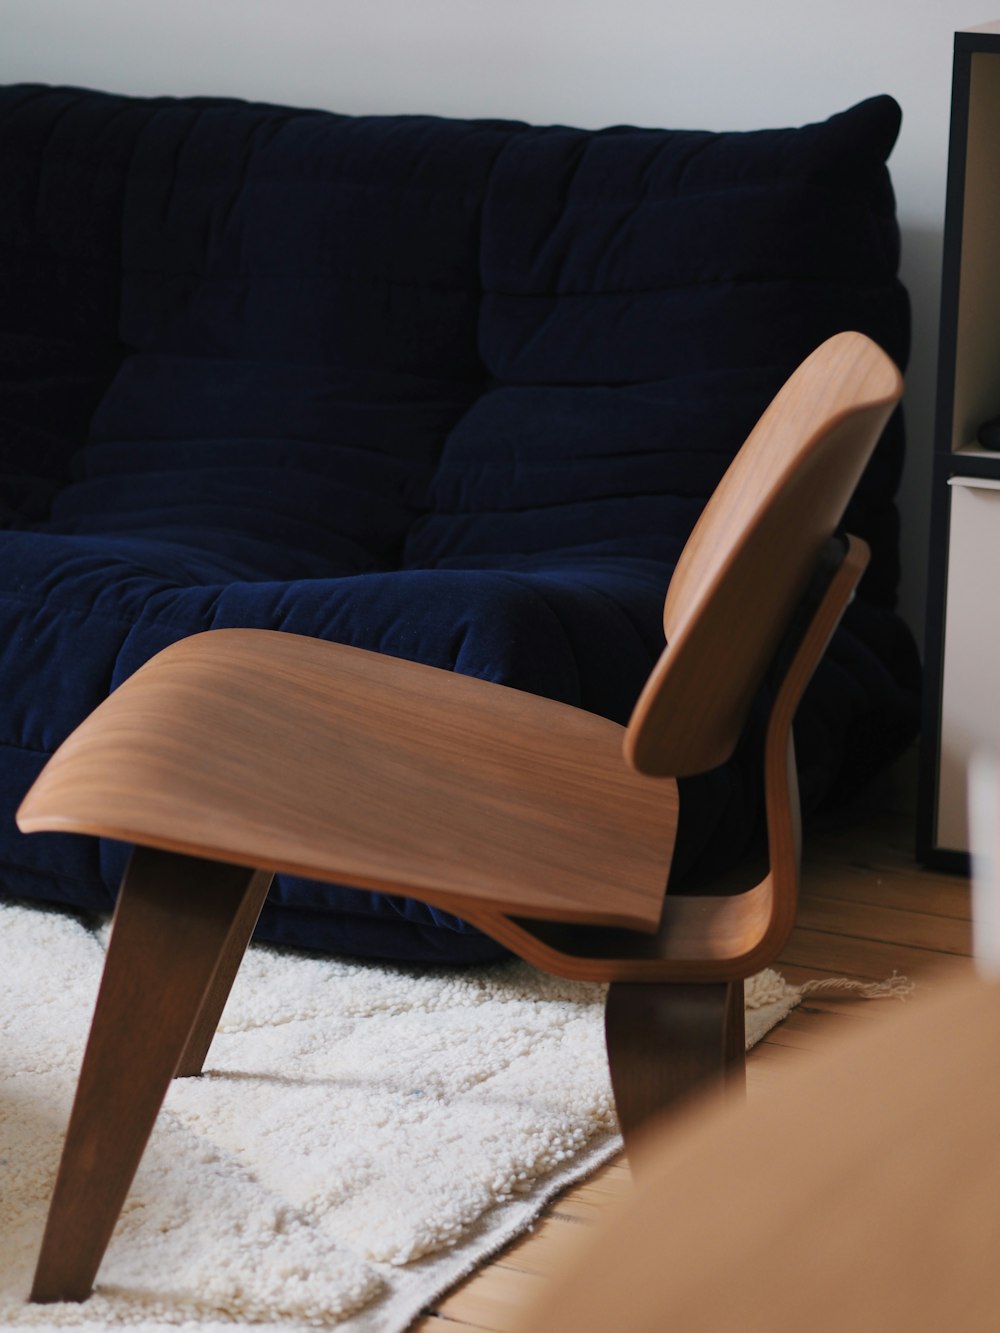 a wooden chair sitting on top of a white rug